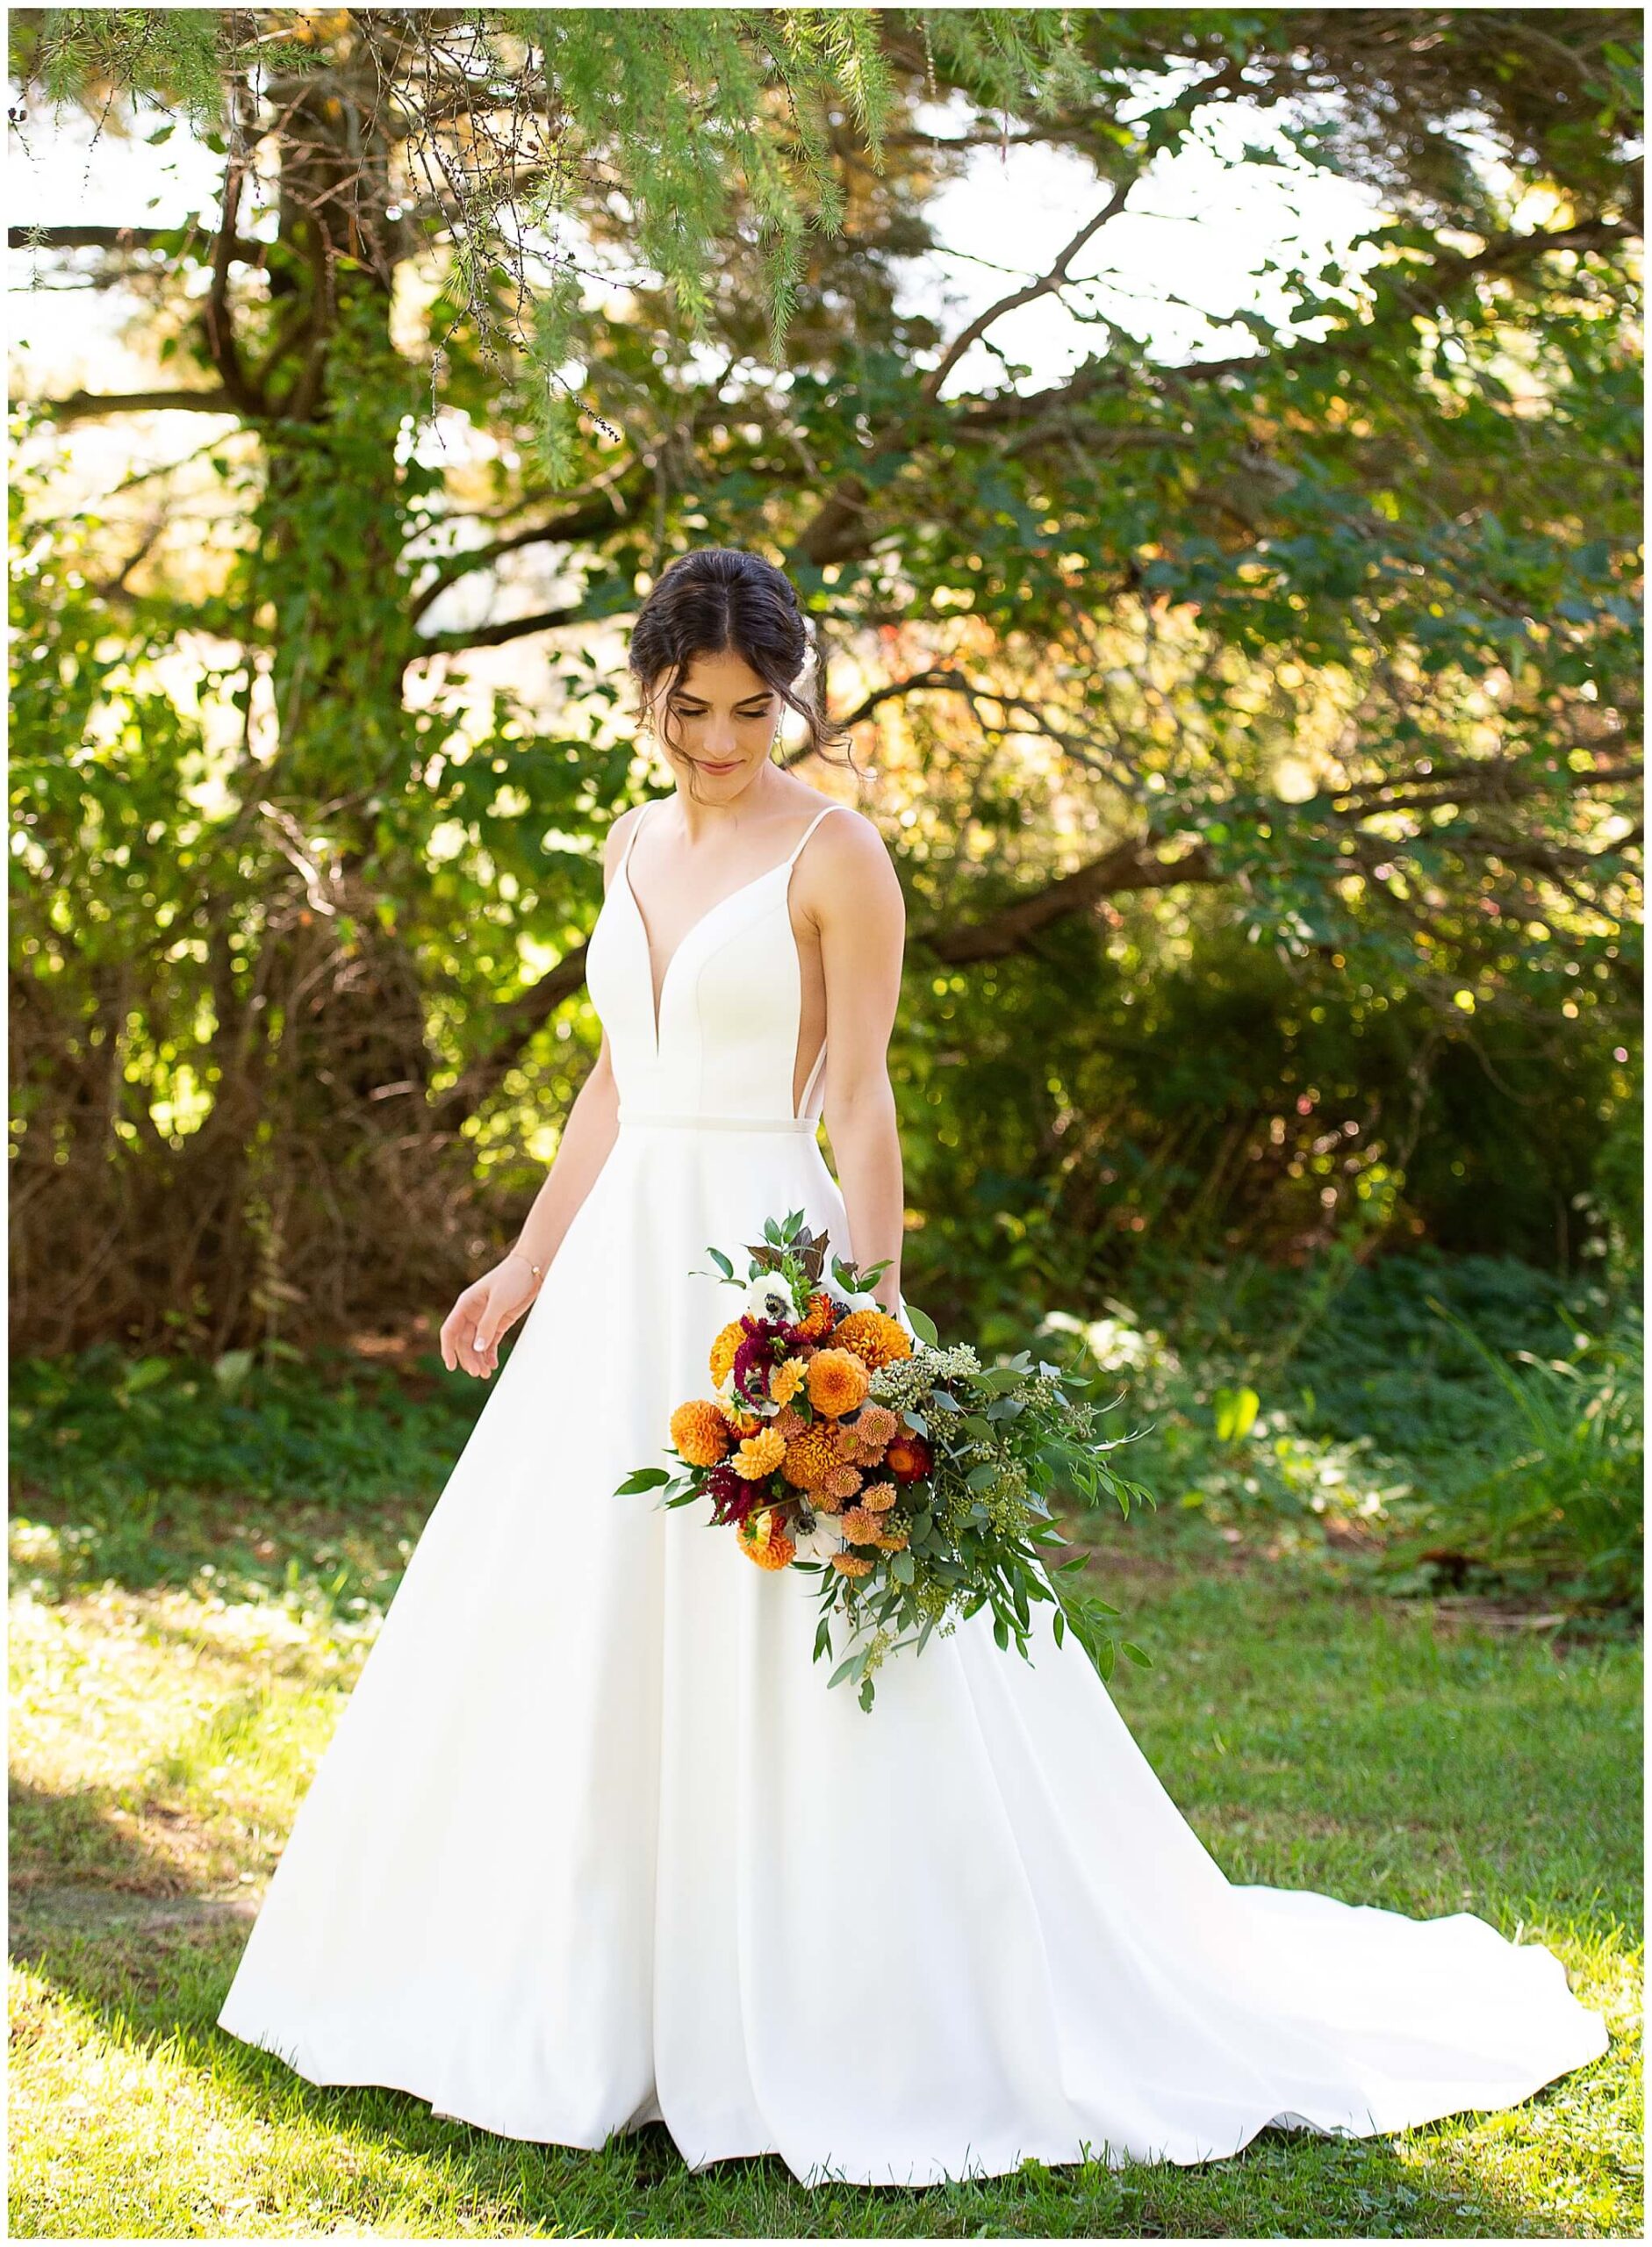 full length portrait of a bride in her wedding gown holding a fall coloured bouquet. Taken outdoors in the Heritage Garden of Strathmere wedding venue in Ottawa